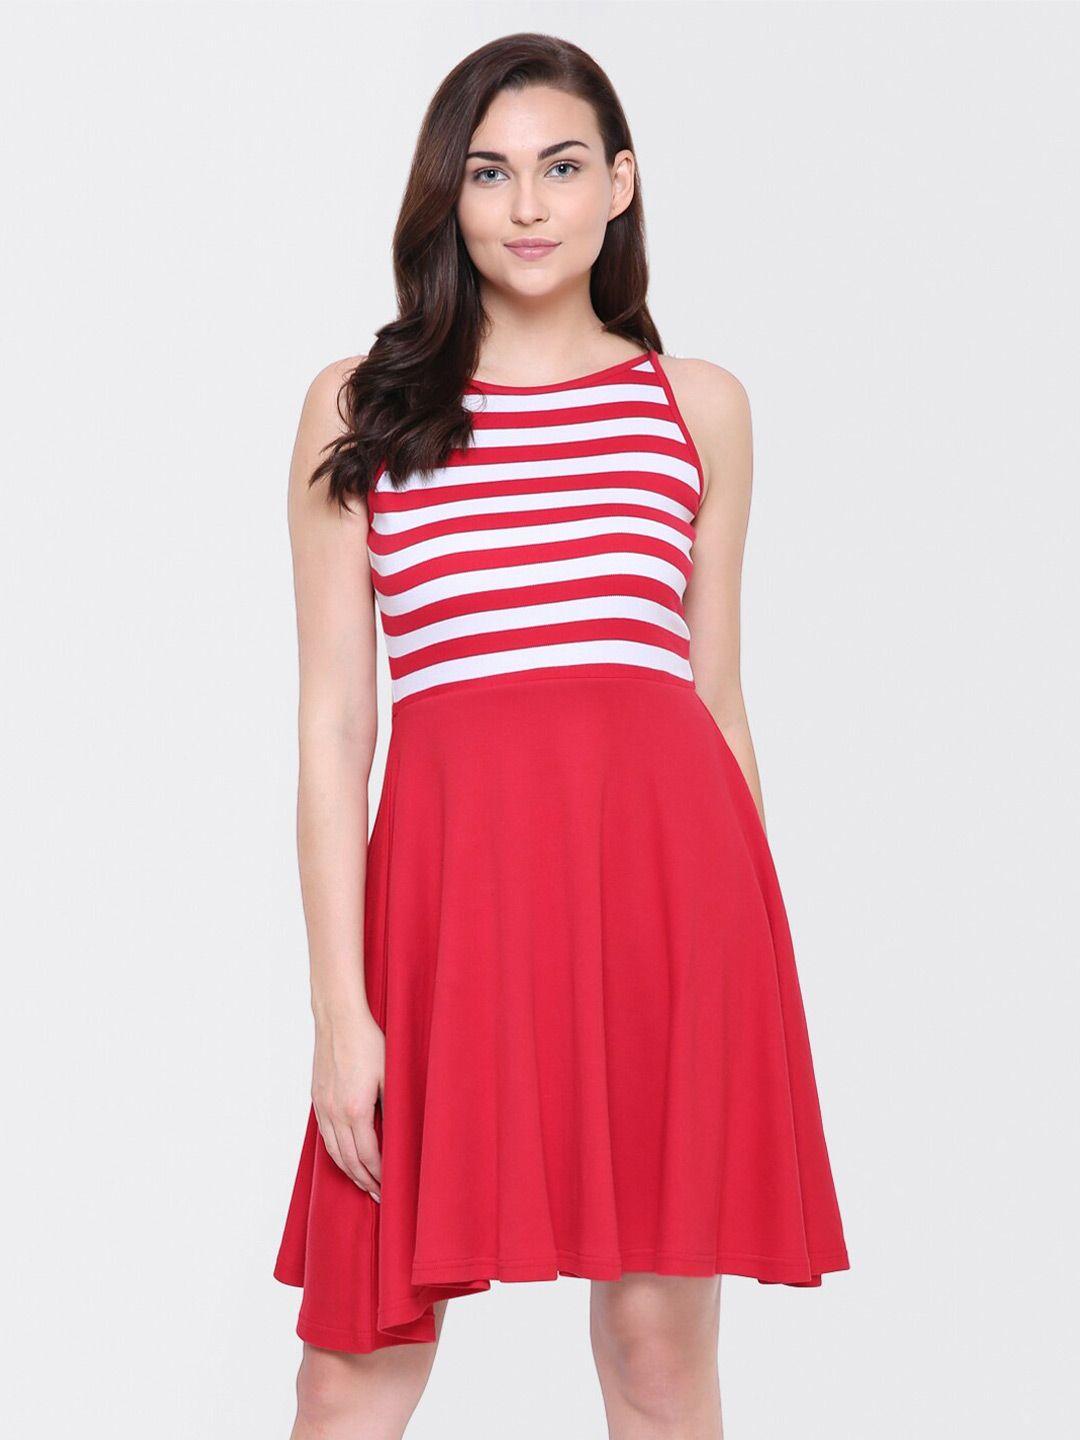 yaadleen red striped fit & flare dress